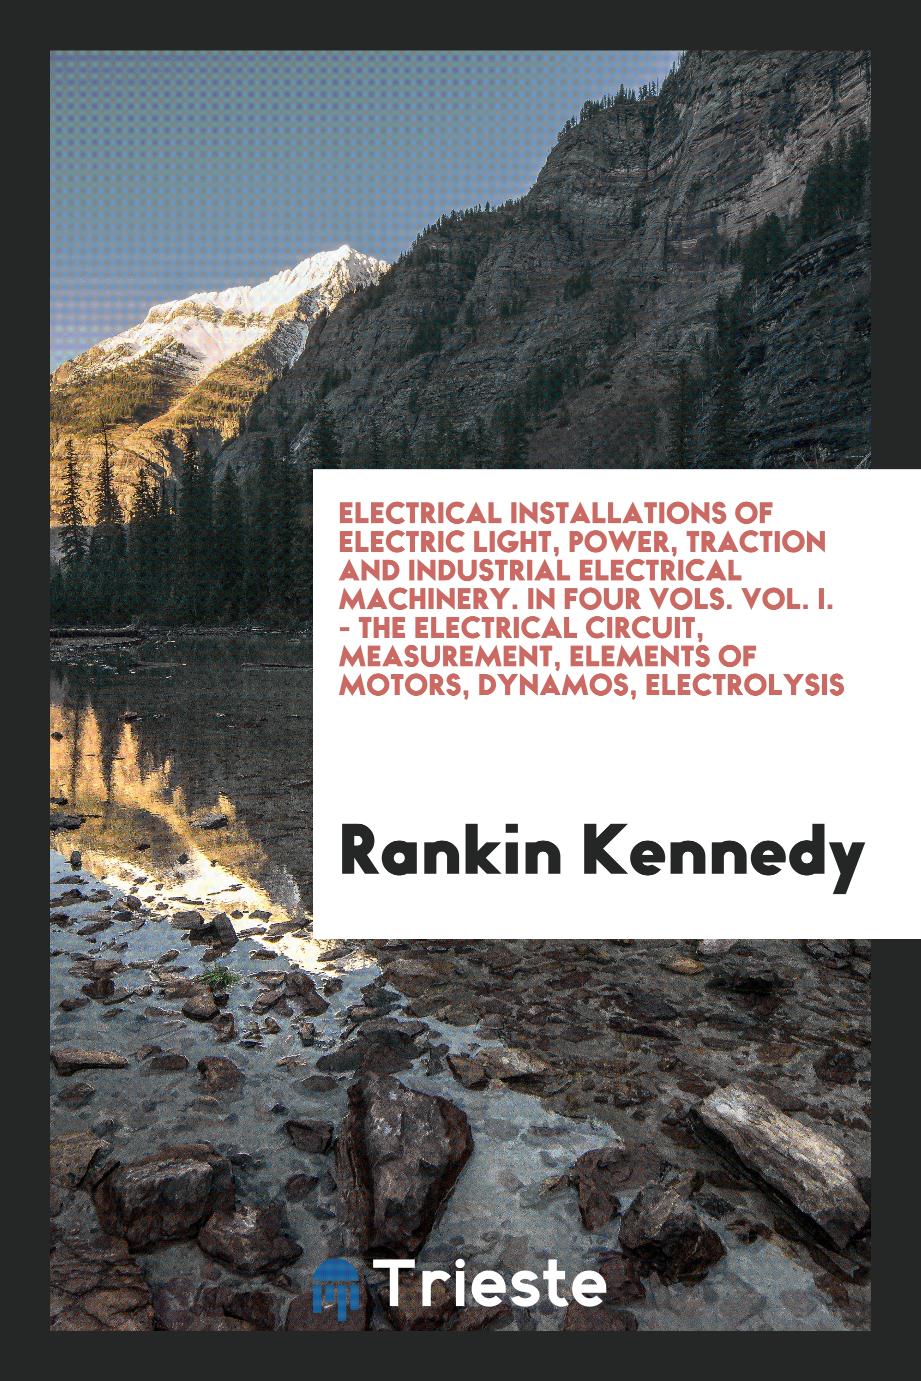 Rankin Kennedy - Electrical Installations of Electric Light, Power, Traction and Industrial Electrical Machinery. In Four Vols. Vol. I. - the Electrical Circuit, Measurement, Elements of Motors, Dynamos, Electrolysis